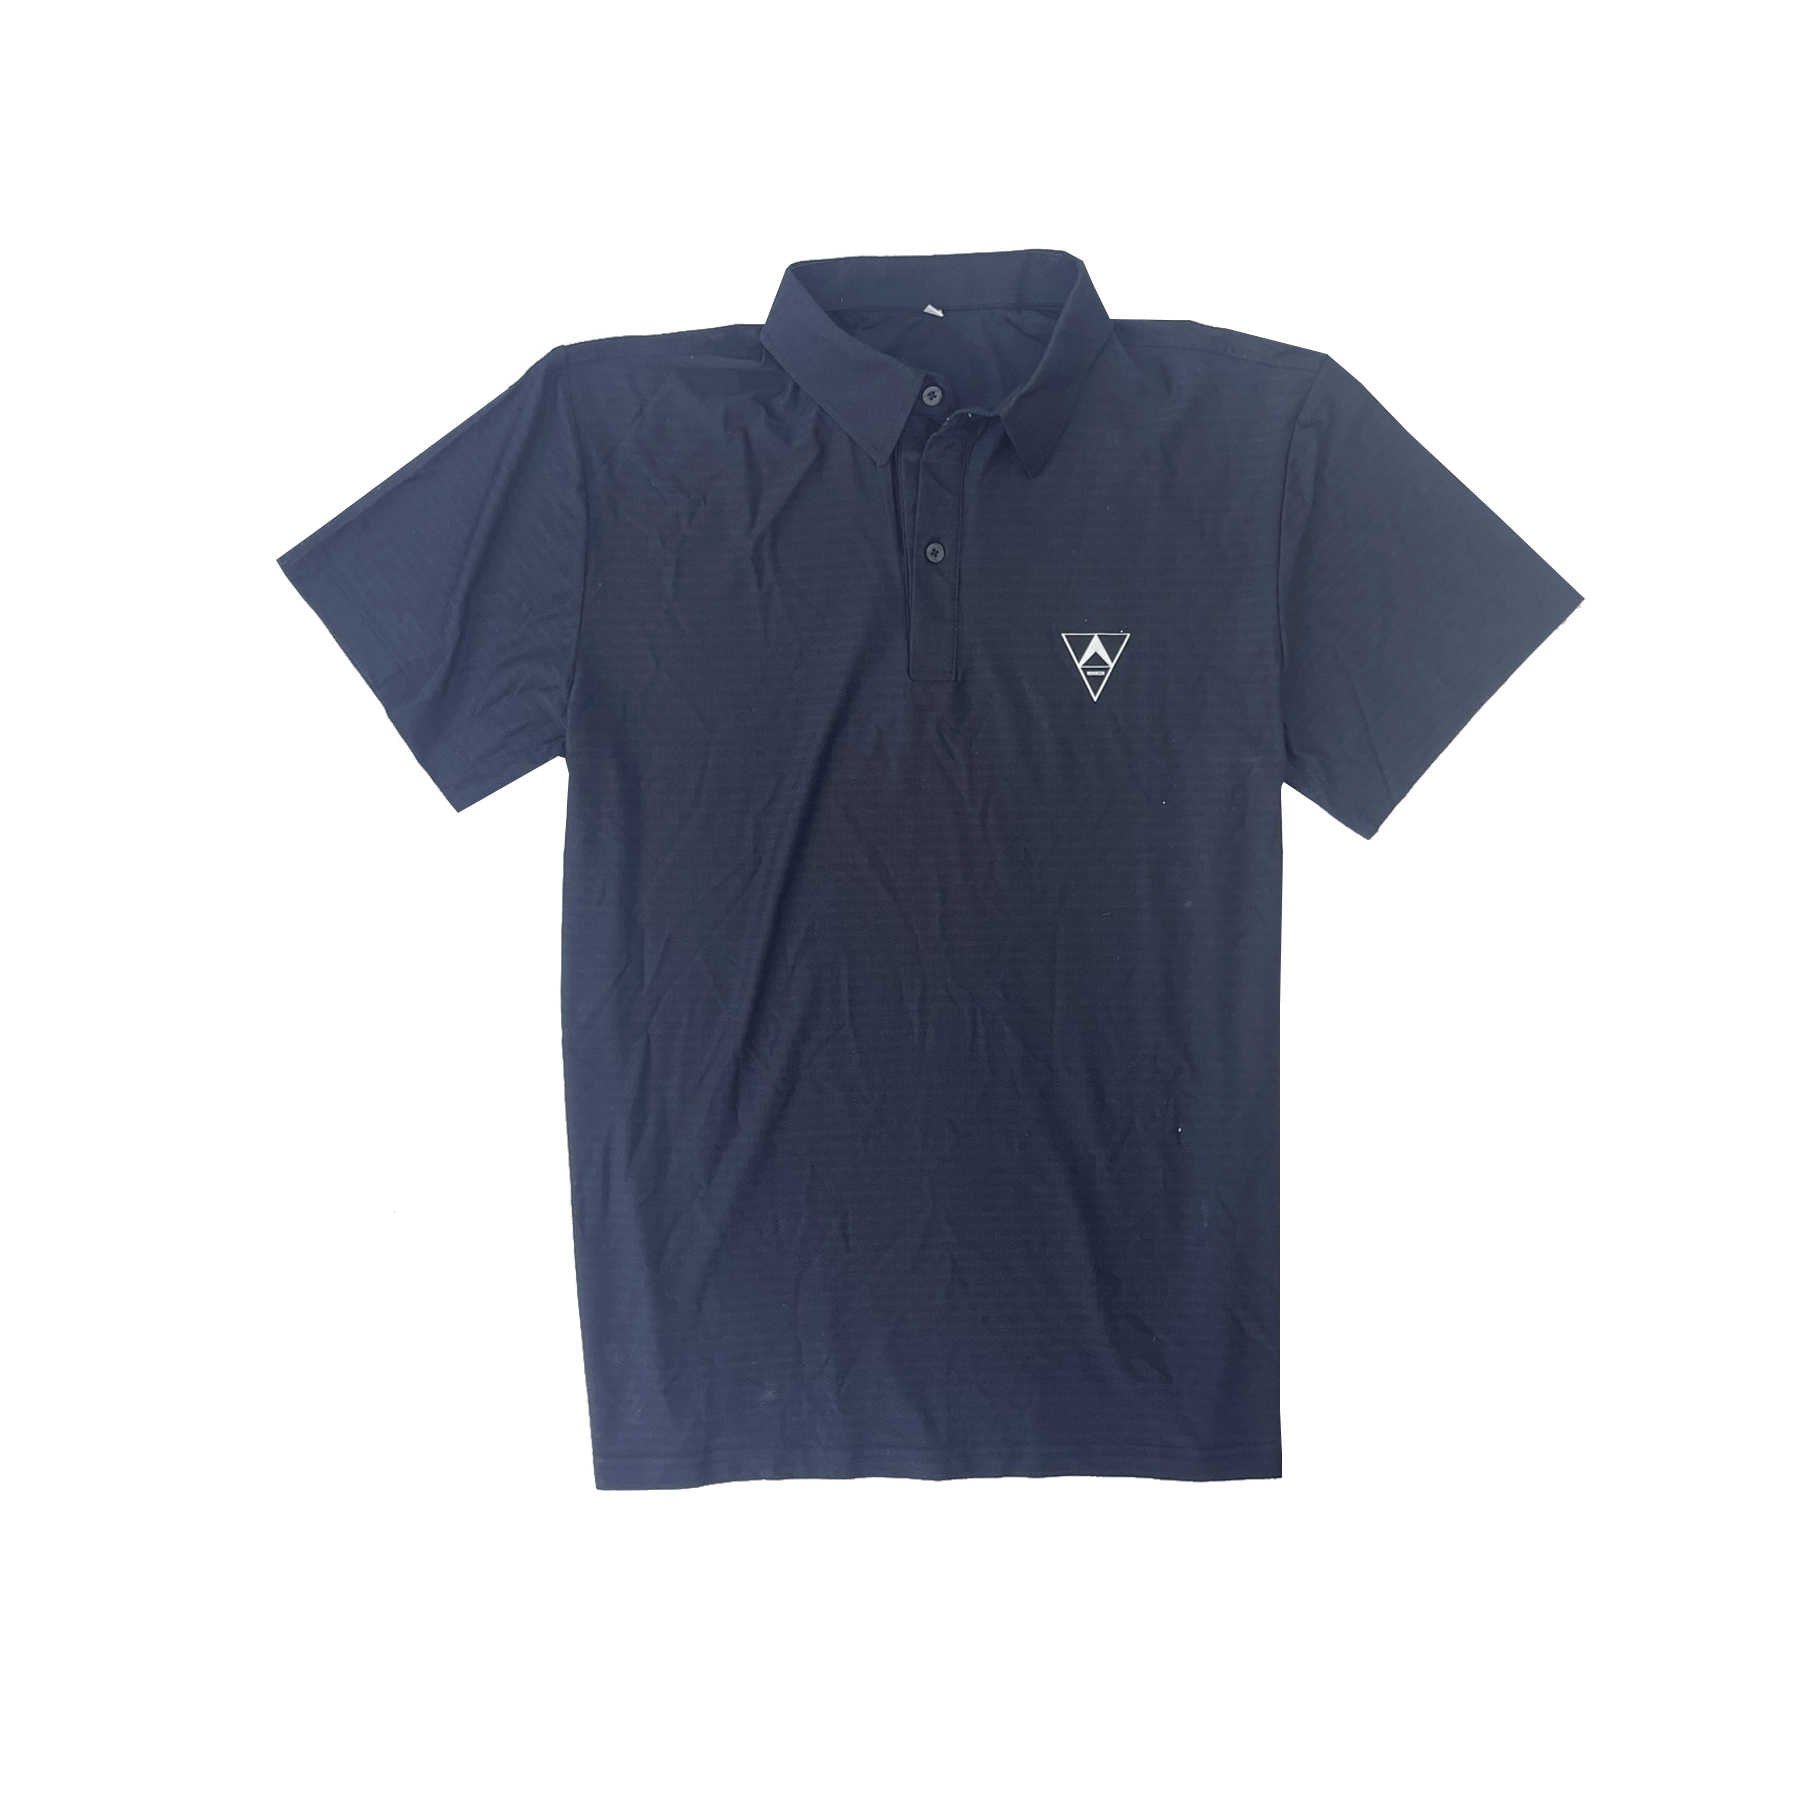 Polo T-Shirt Short Sleeve Fast Delivery Ready To Ship Oem Customized Packaging Made In Vietnam Manufacturer 7